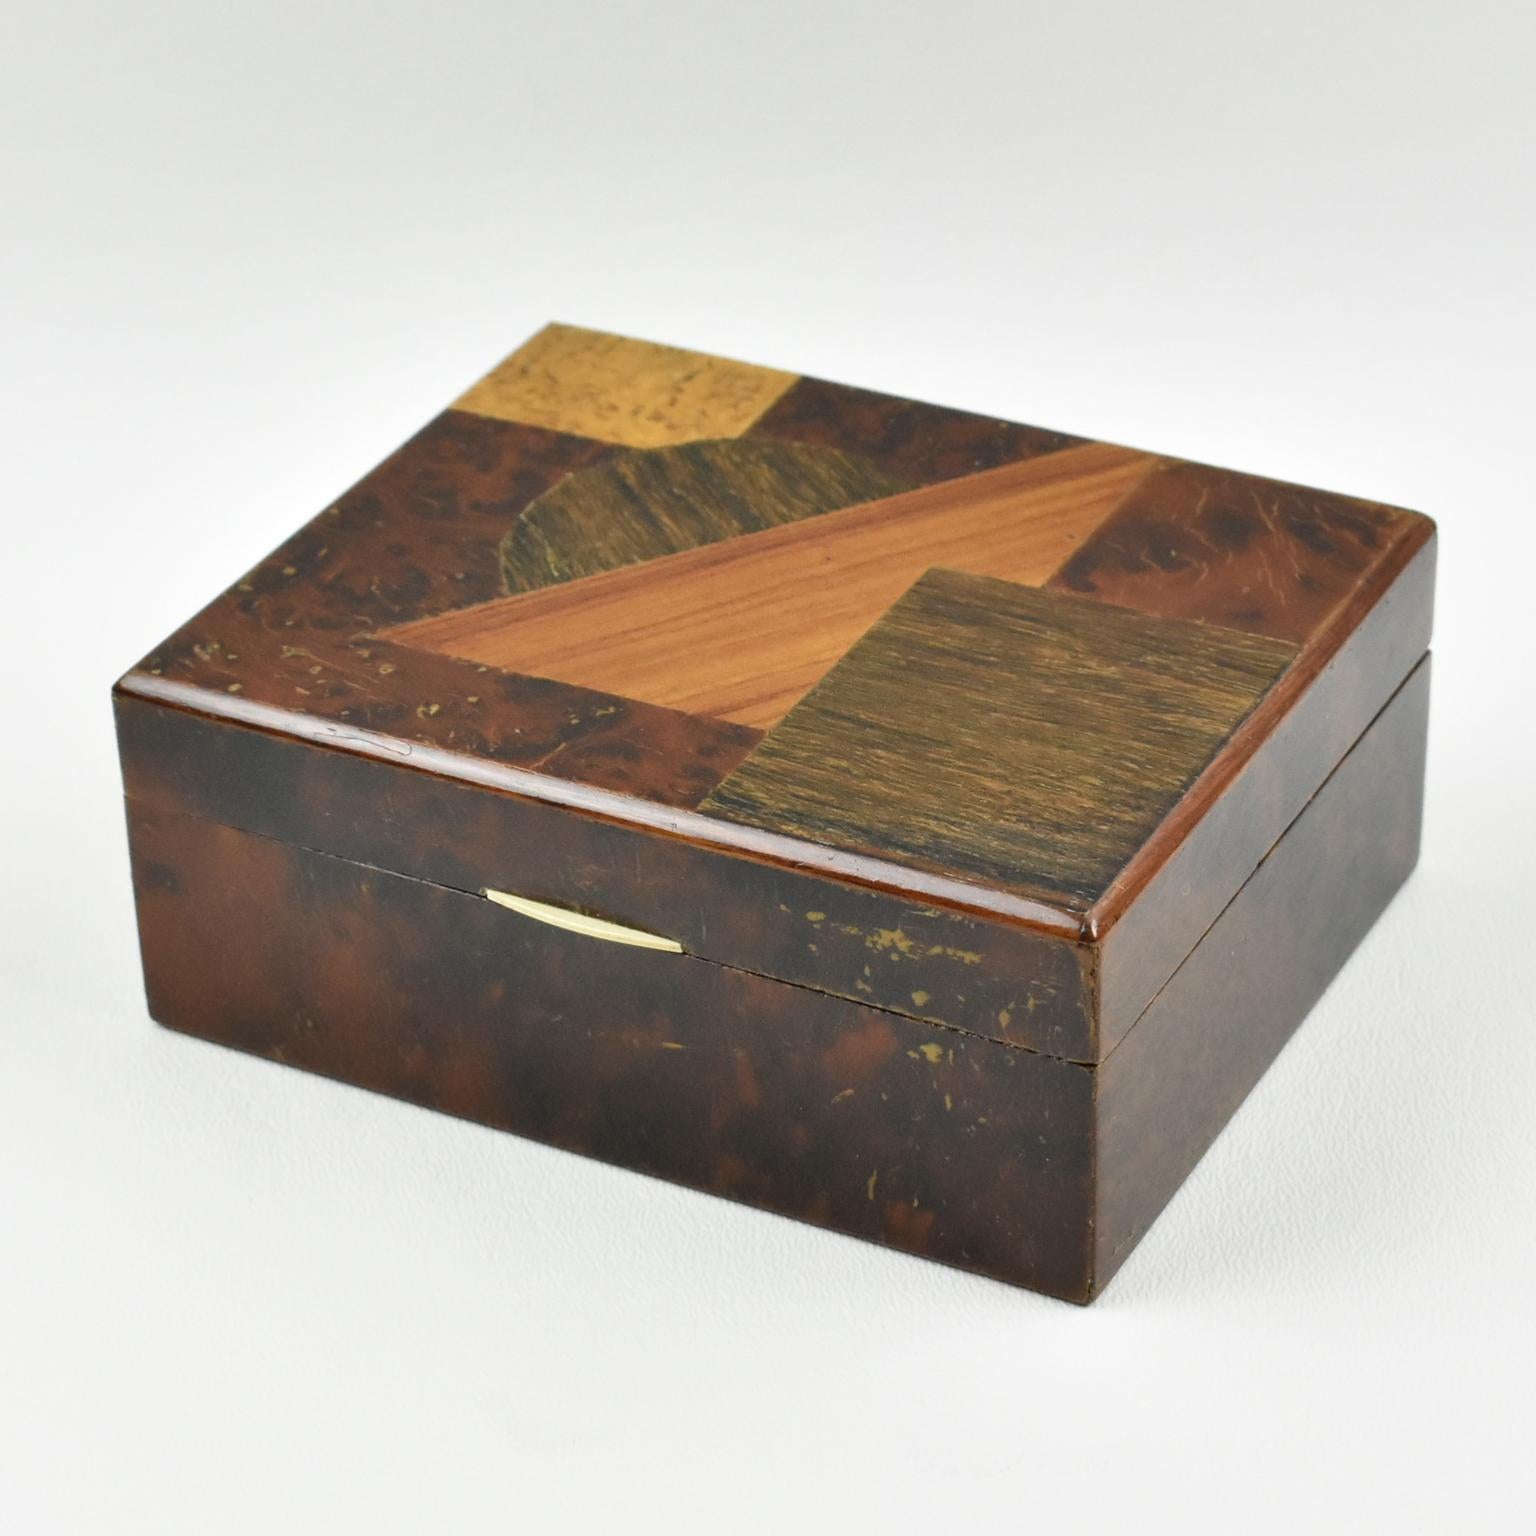 Elegant Art Deco decorative lidded box, featuring a square minimalist shape with varnished burl wood and tiny bone handle. Lid is decorated with different quality wood marquetry in geometric design. Interior in mahogany. No visible